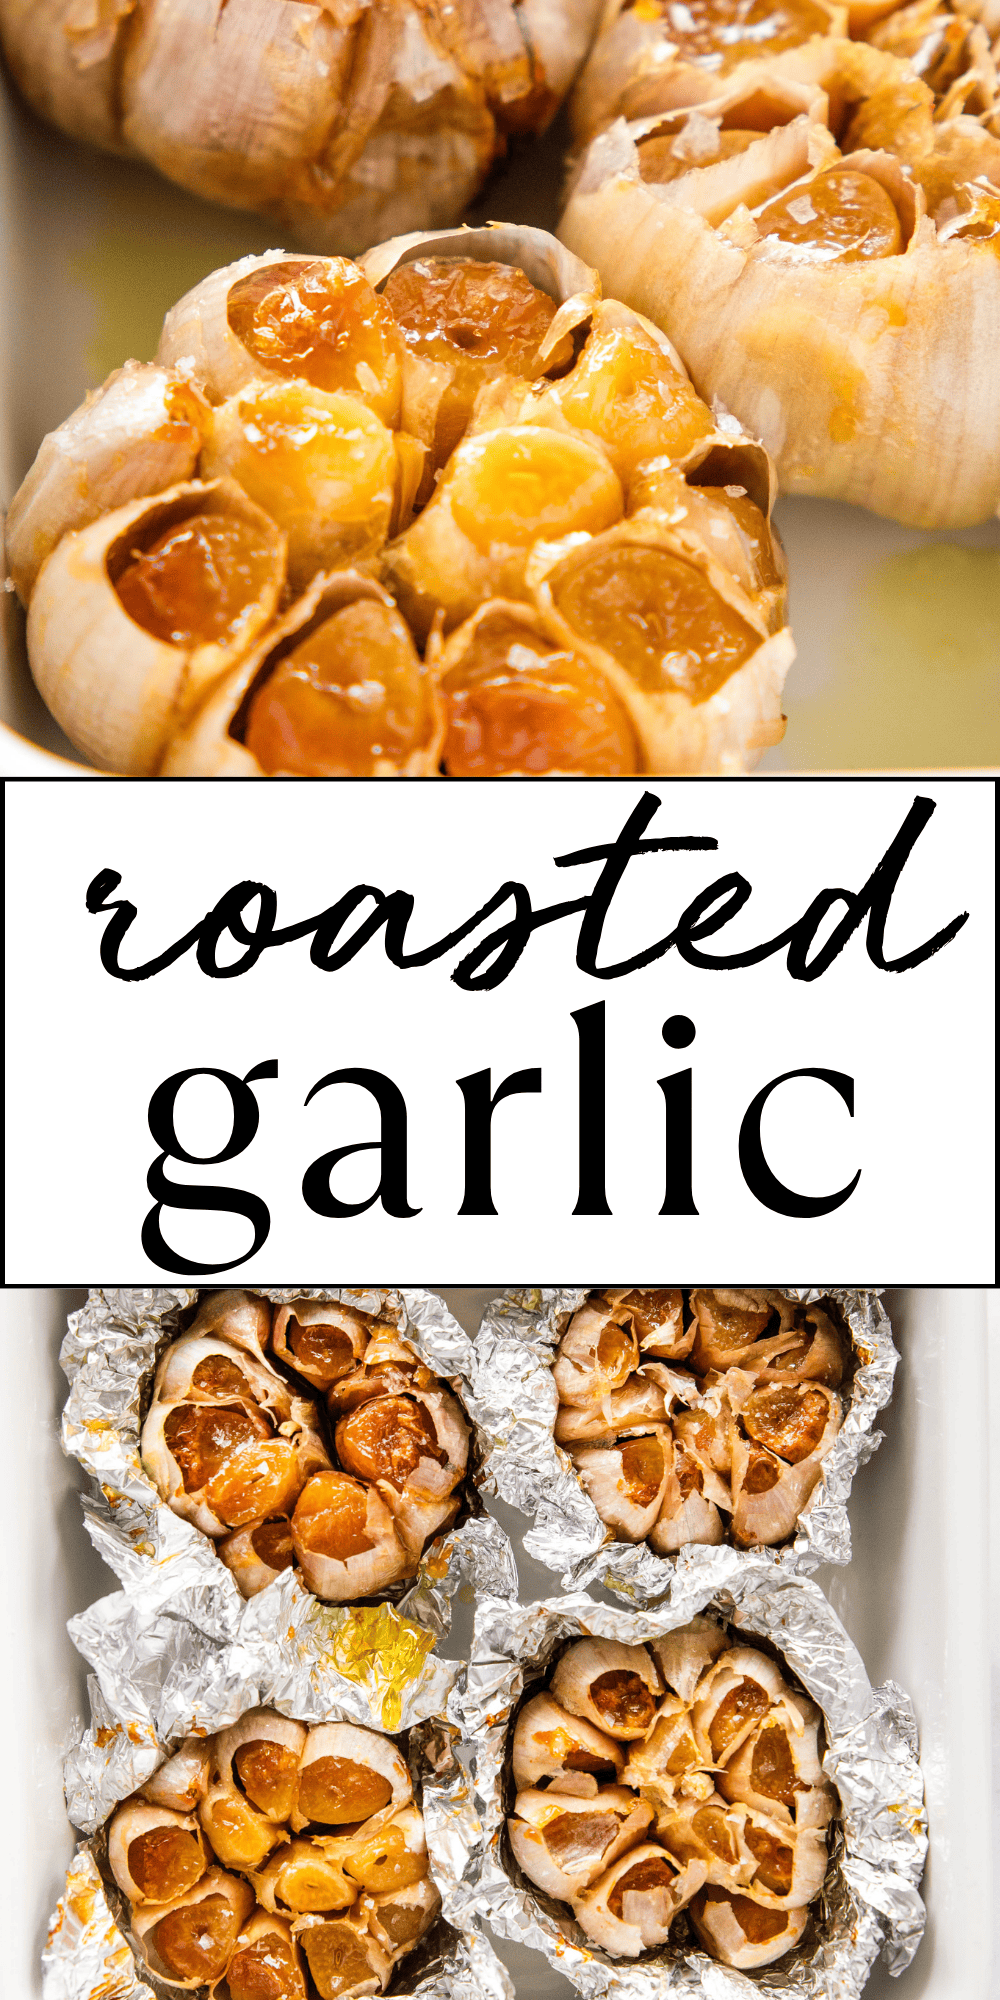 This Roasted Garlic recipe is the ultimate guide to roasting garlic so it turns out perfectly creamy and golden brown, every single time. Learn how to roast garlic in the oven and in the air fryer, and use it in all your favourite recipes! Recipe from thebusybaker.ca! #roastgarlic #howtoroastgarlic #roastedgarlic #roastedgarlicrecipe #howtomakeroastedgarlic via @busybakerblog